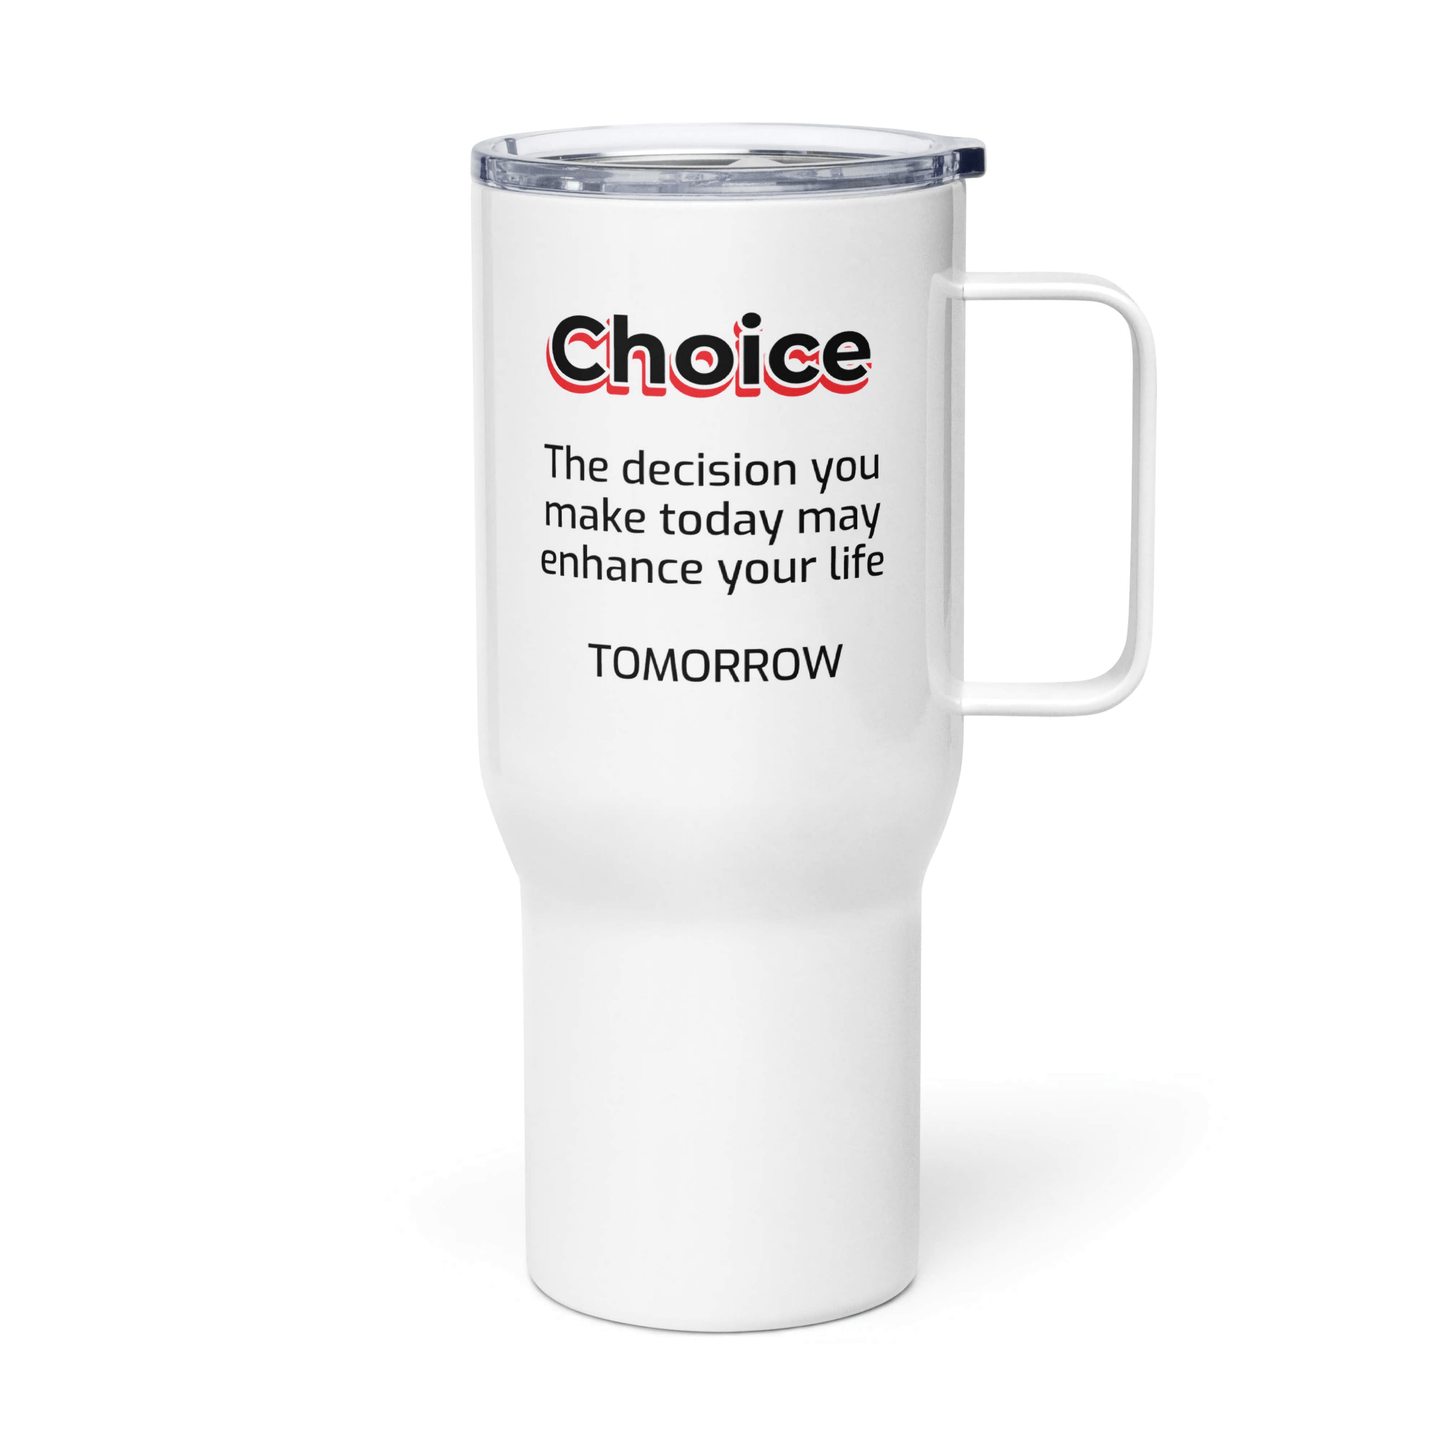 A Tumbler With a Motivational Quote About (Choice) - Motivational Wonders